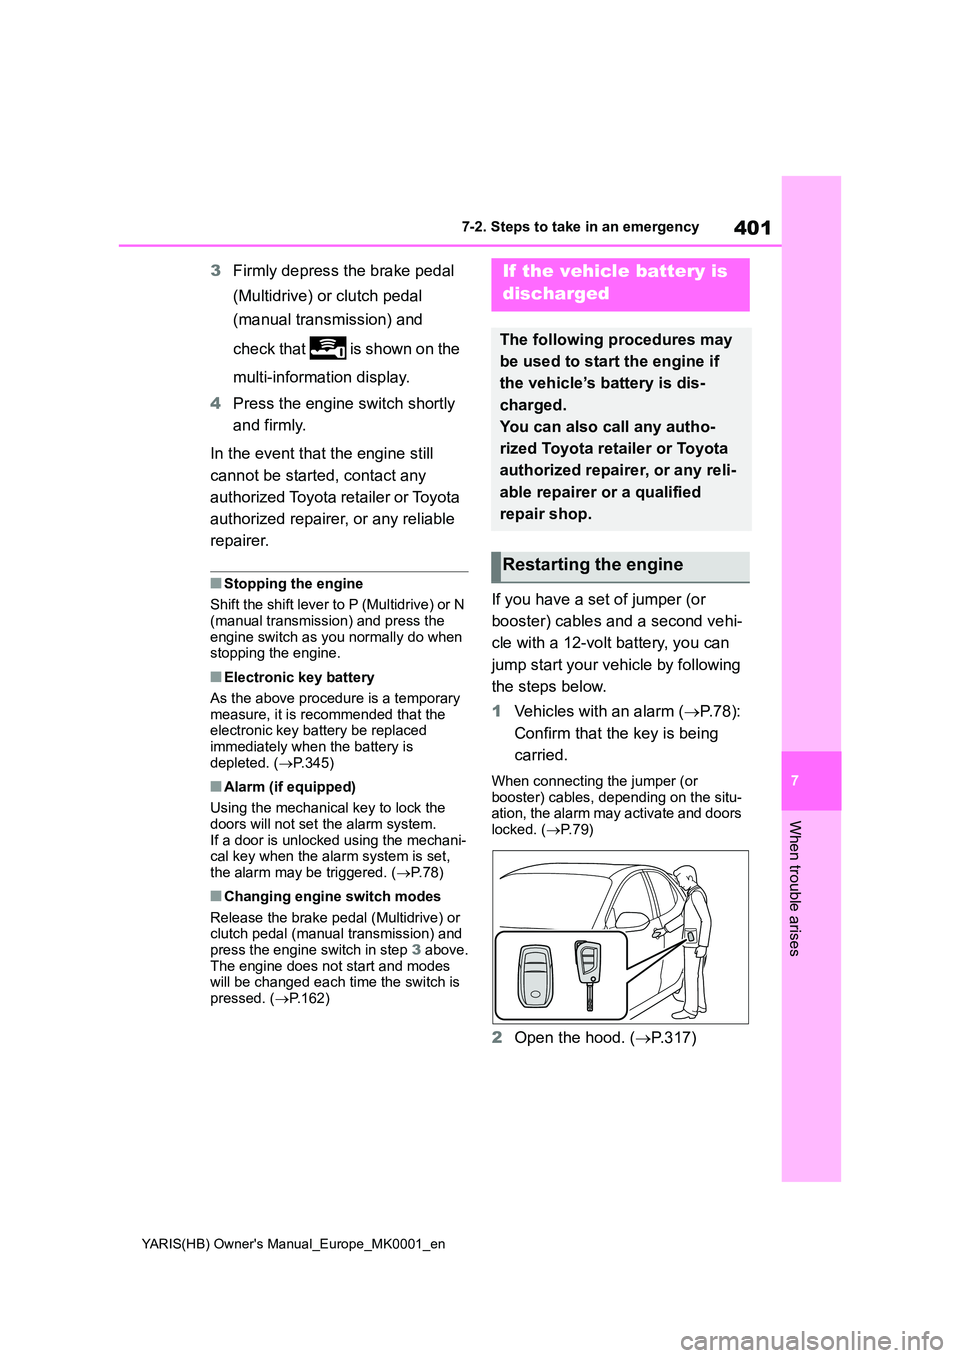 TOYOTA YARIS HATCHBACK 2021  Owners Manual 401
7
YARIS(HB) Owners Manual_Europe_MK0001_en
7-2. Steps to take in an emergency
When trouble arises
3Firmly depress the brake pedal  
(Multidrive) or clutch pedal  
(manual transmission) and  
chec